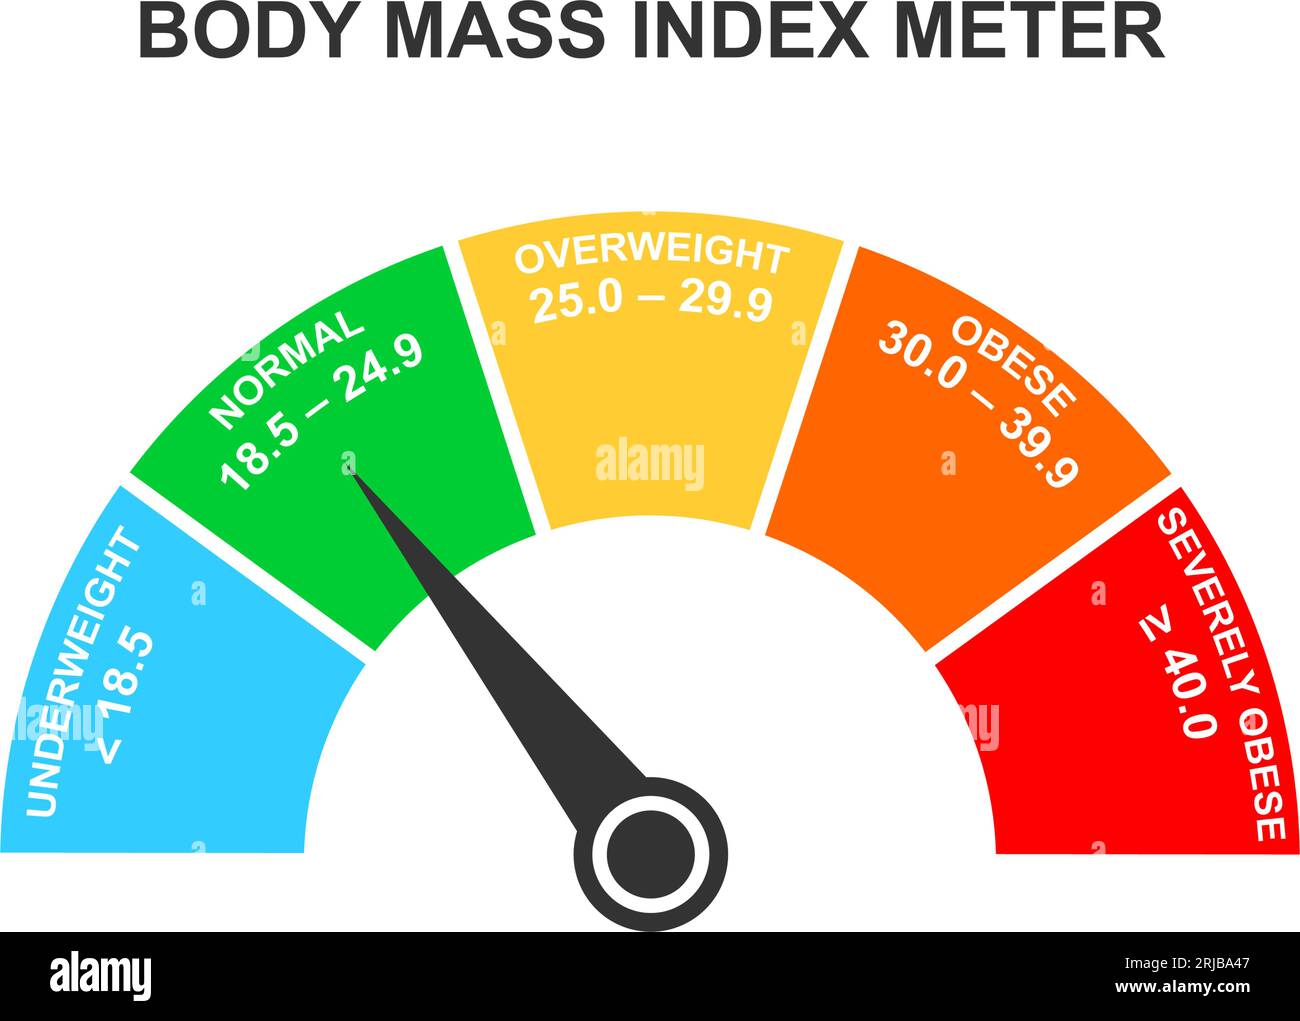 Free Vector  Body mass index. weight control with bmi. healthy and  unhealthy lifestyle flat vector illustration. fitness indicator before and  after diet. overall health body fat scale concept.